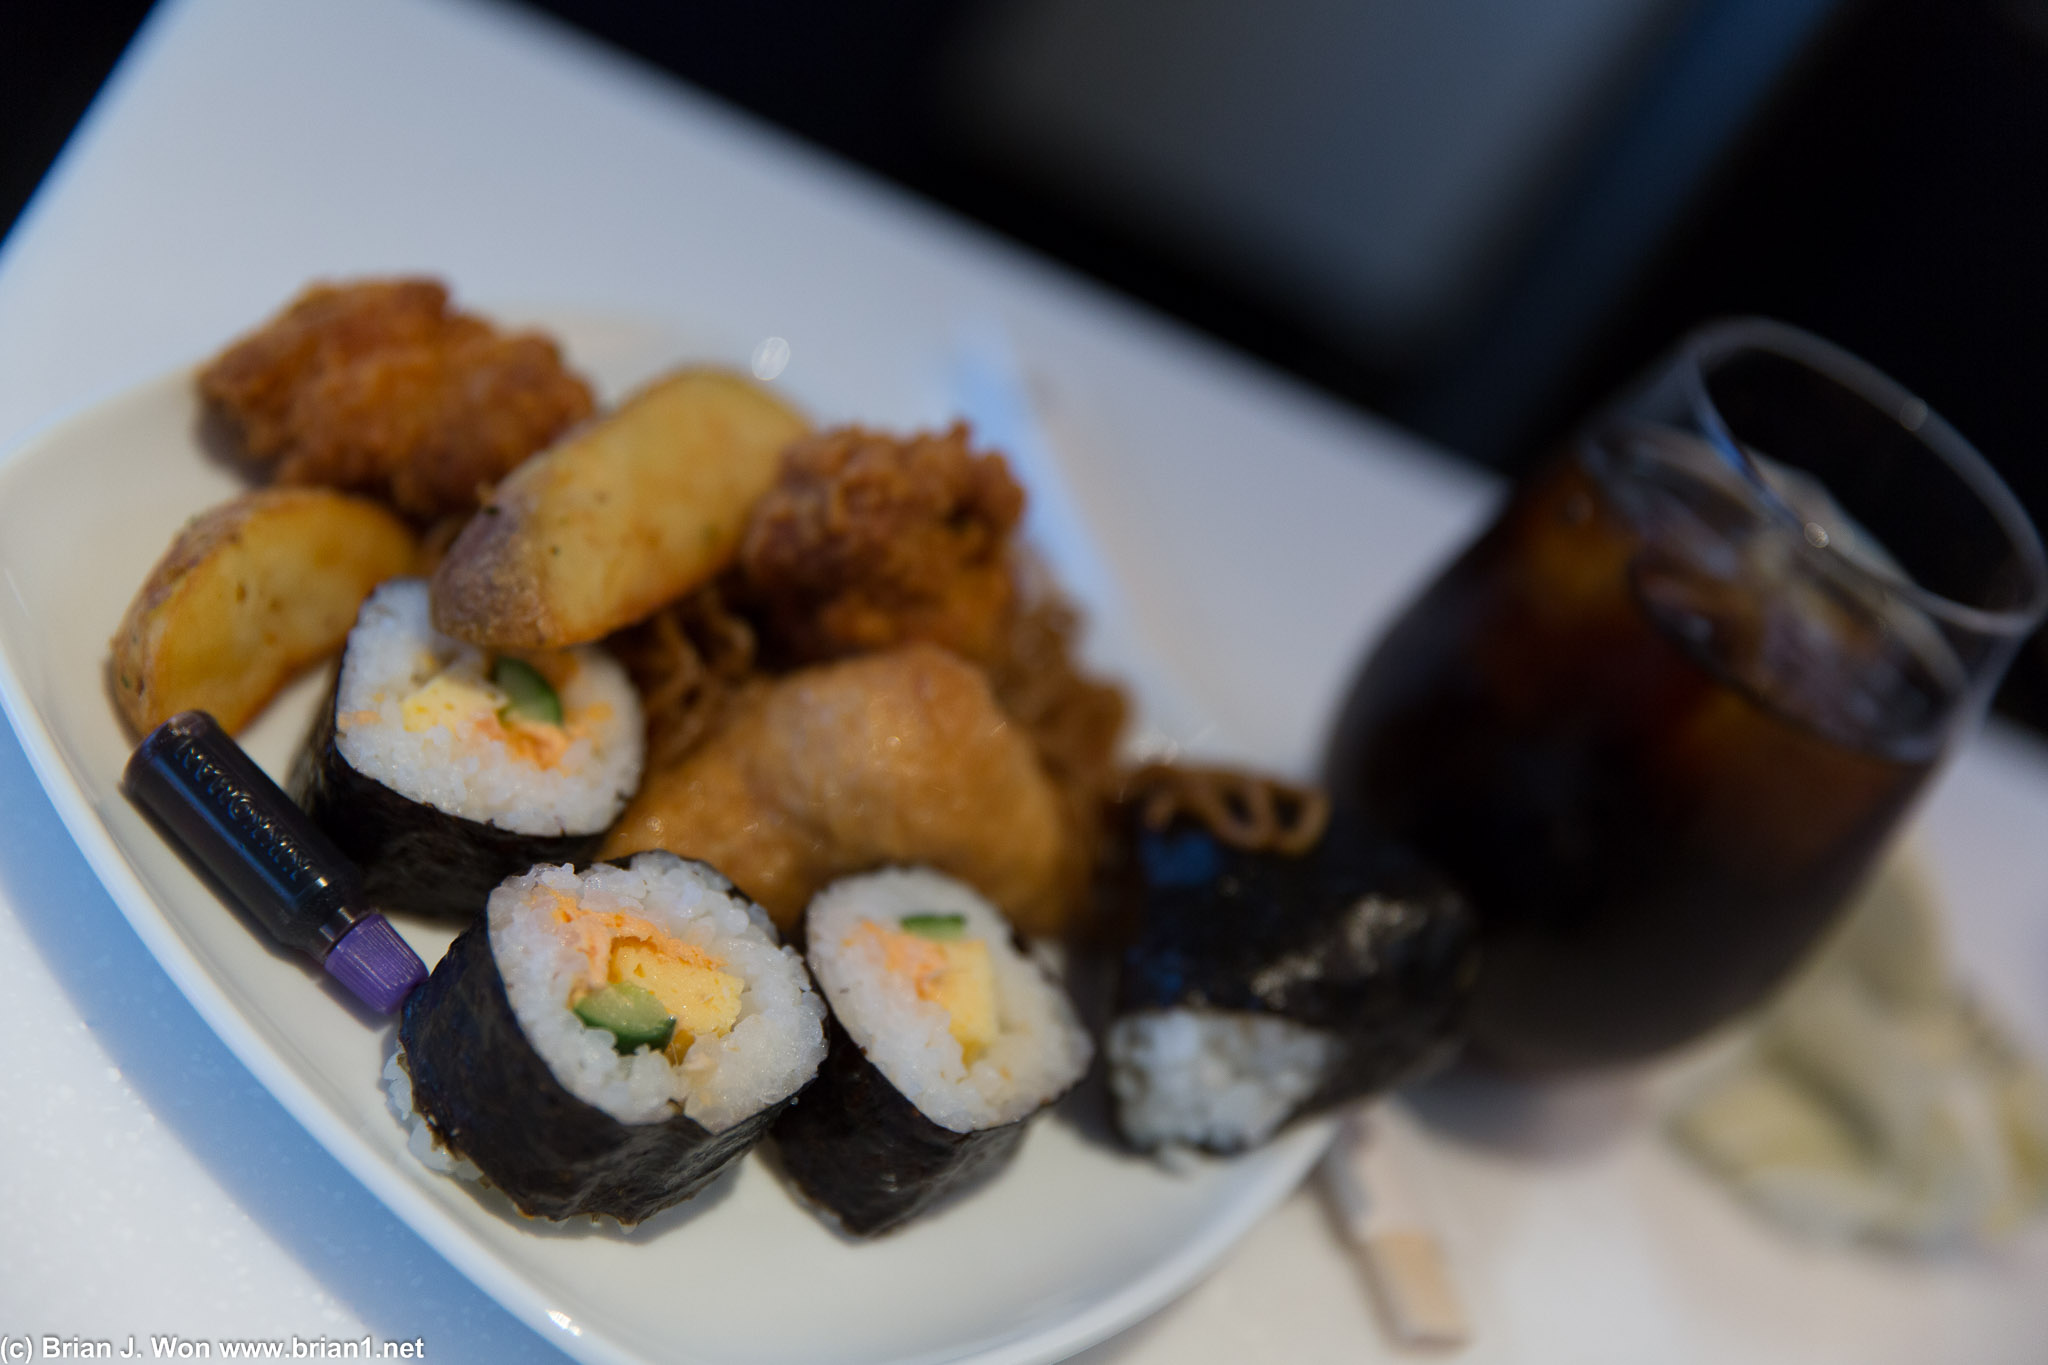 Noodles and fried chicken weren't bad; sushi is okay.